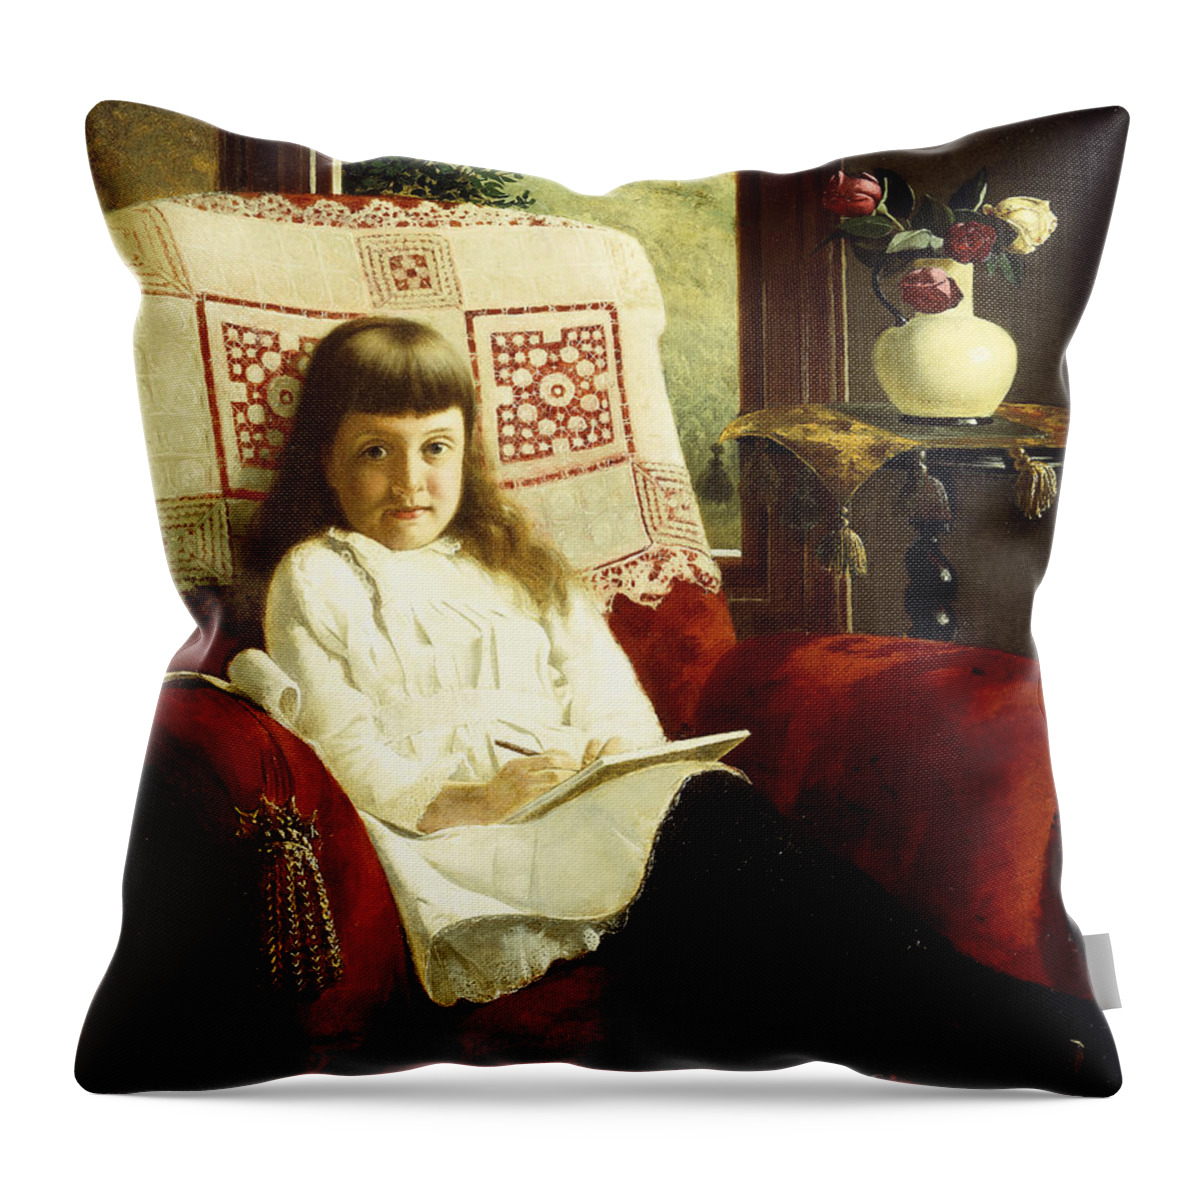 Wood (material) Throw Pillow featuring the painting Mildred Wallace As A Young Girl by Thomas Waterman Wood